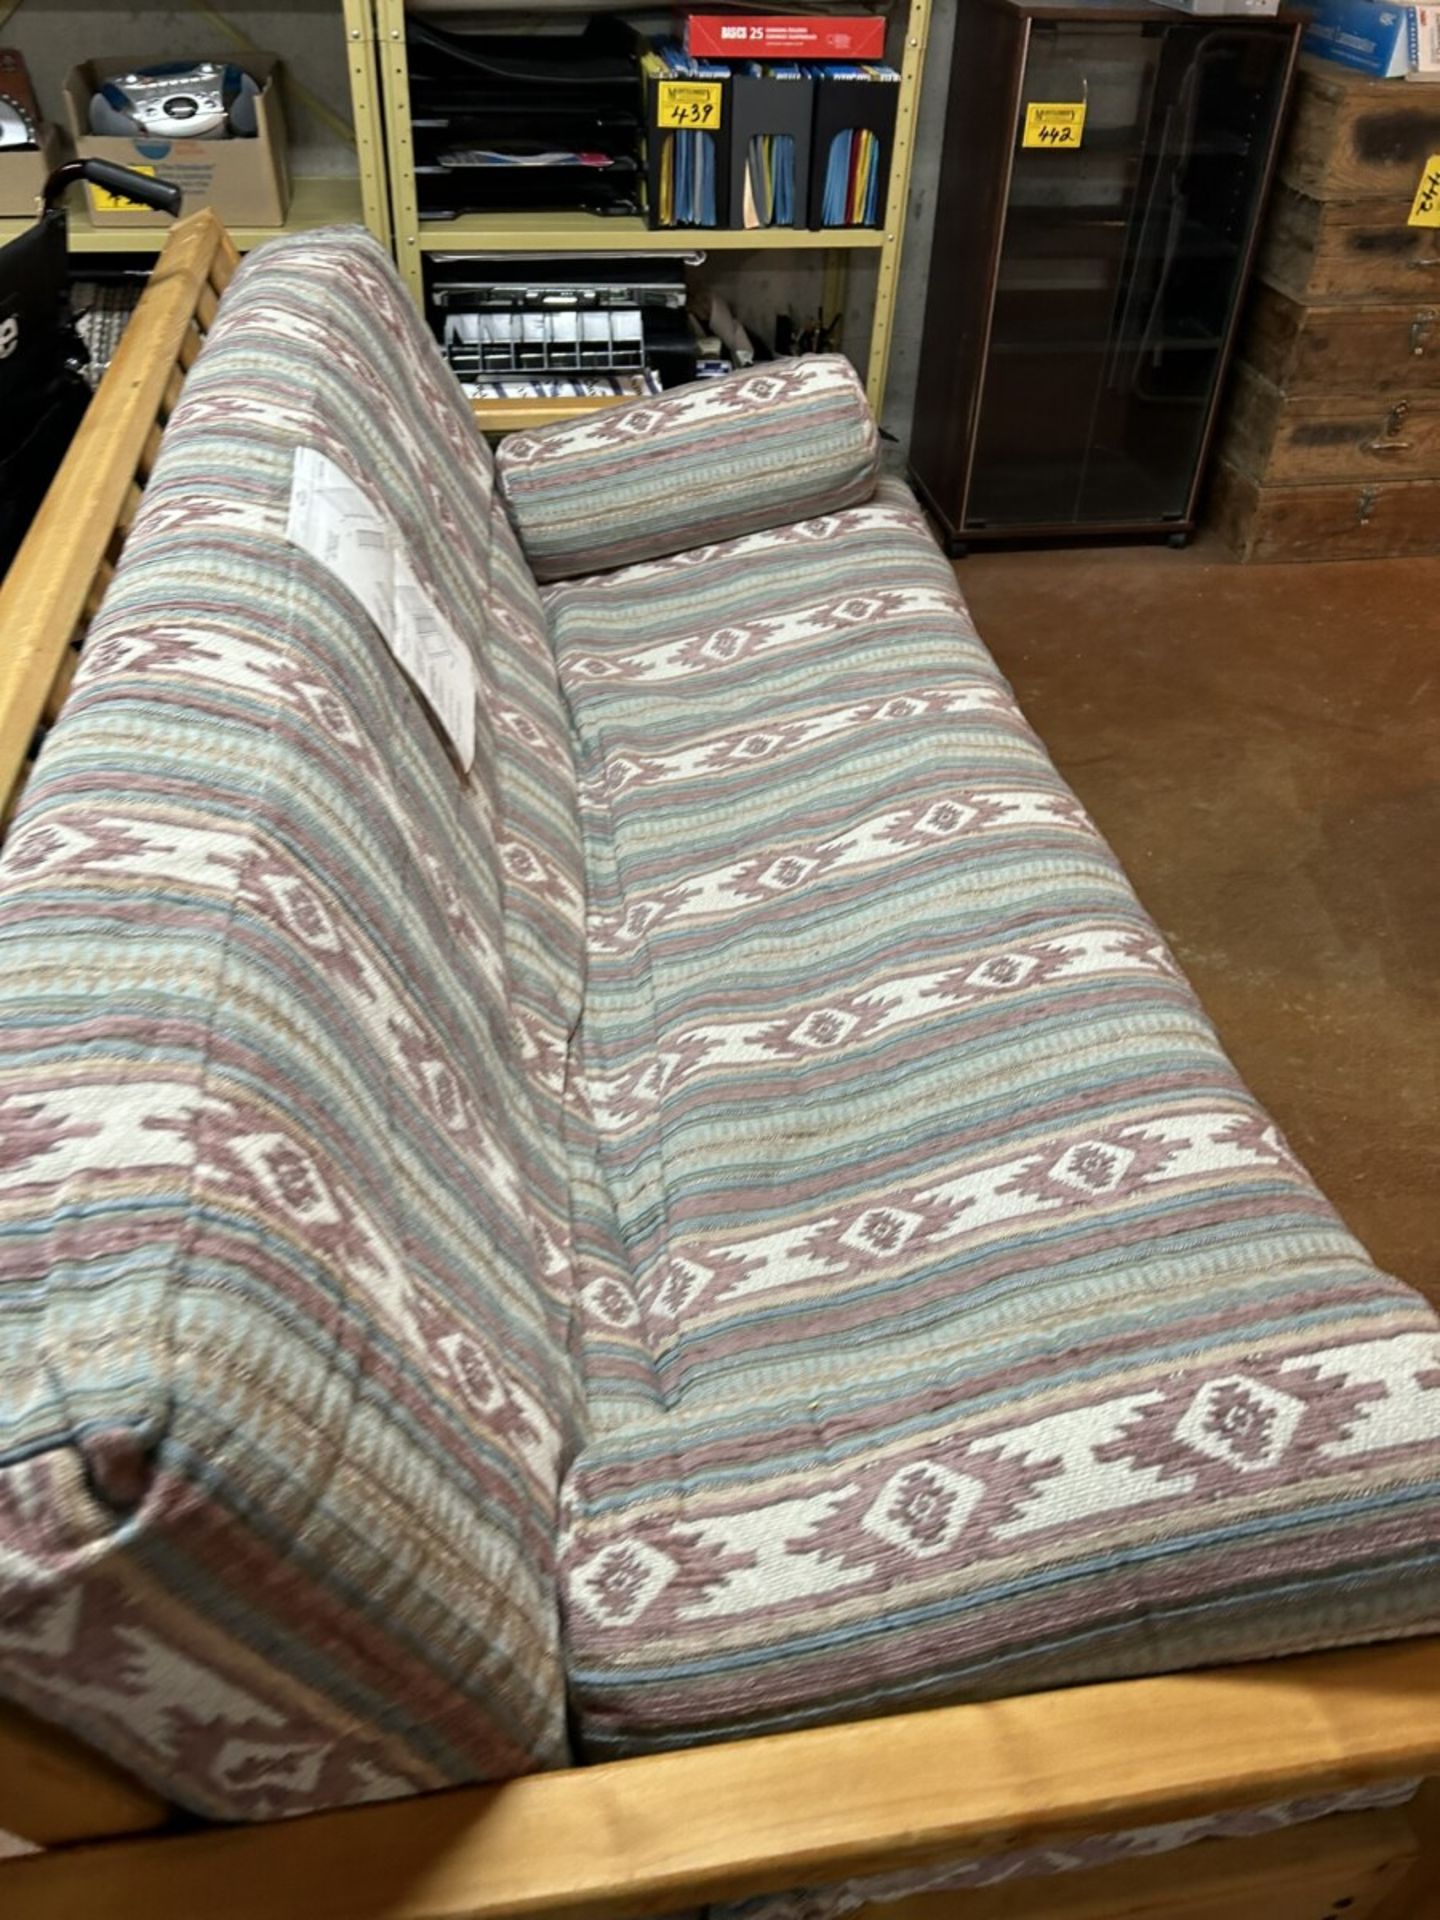 WOODEN FRAME FUTON COUCH - Image 4 of 5